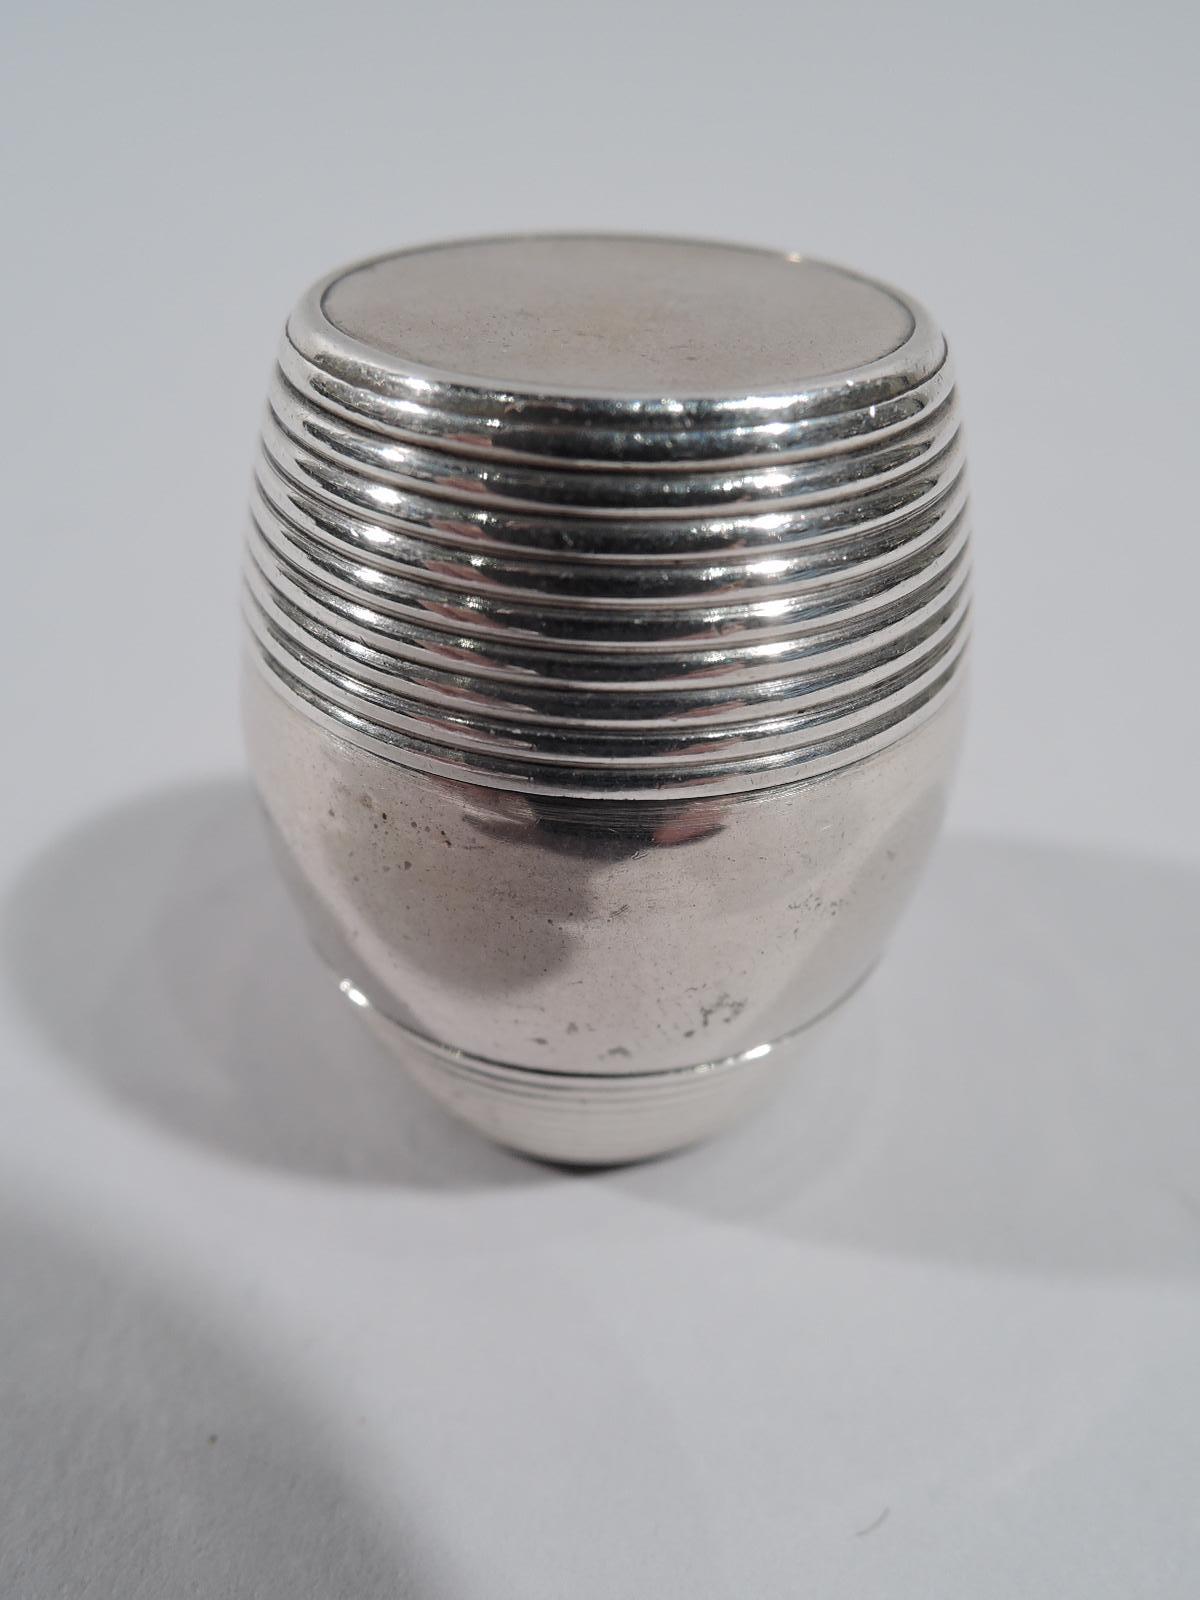 English sterling silver nutmeg grater, early 19th century. Barrel form with reeded top and bottom; cover threaded. Detachable grill. Maker’s mark.